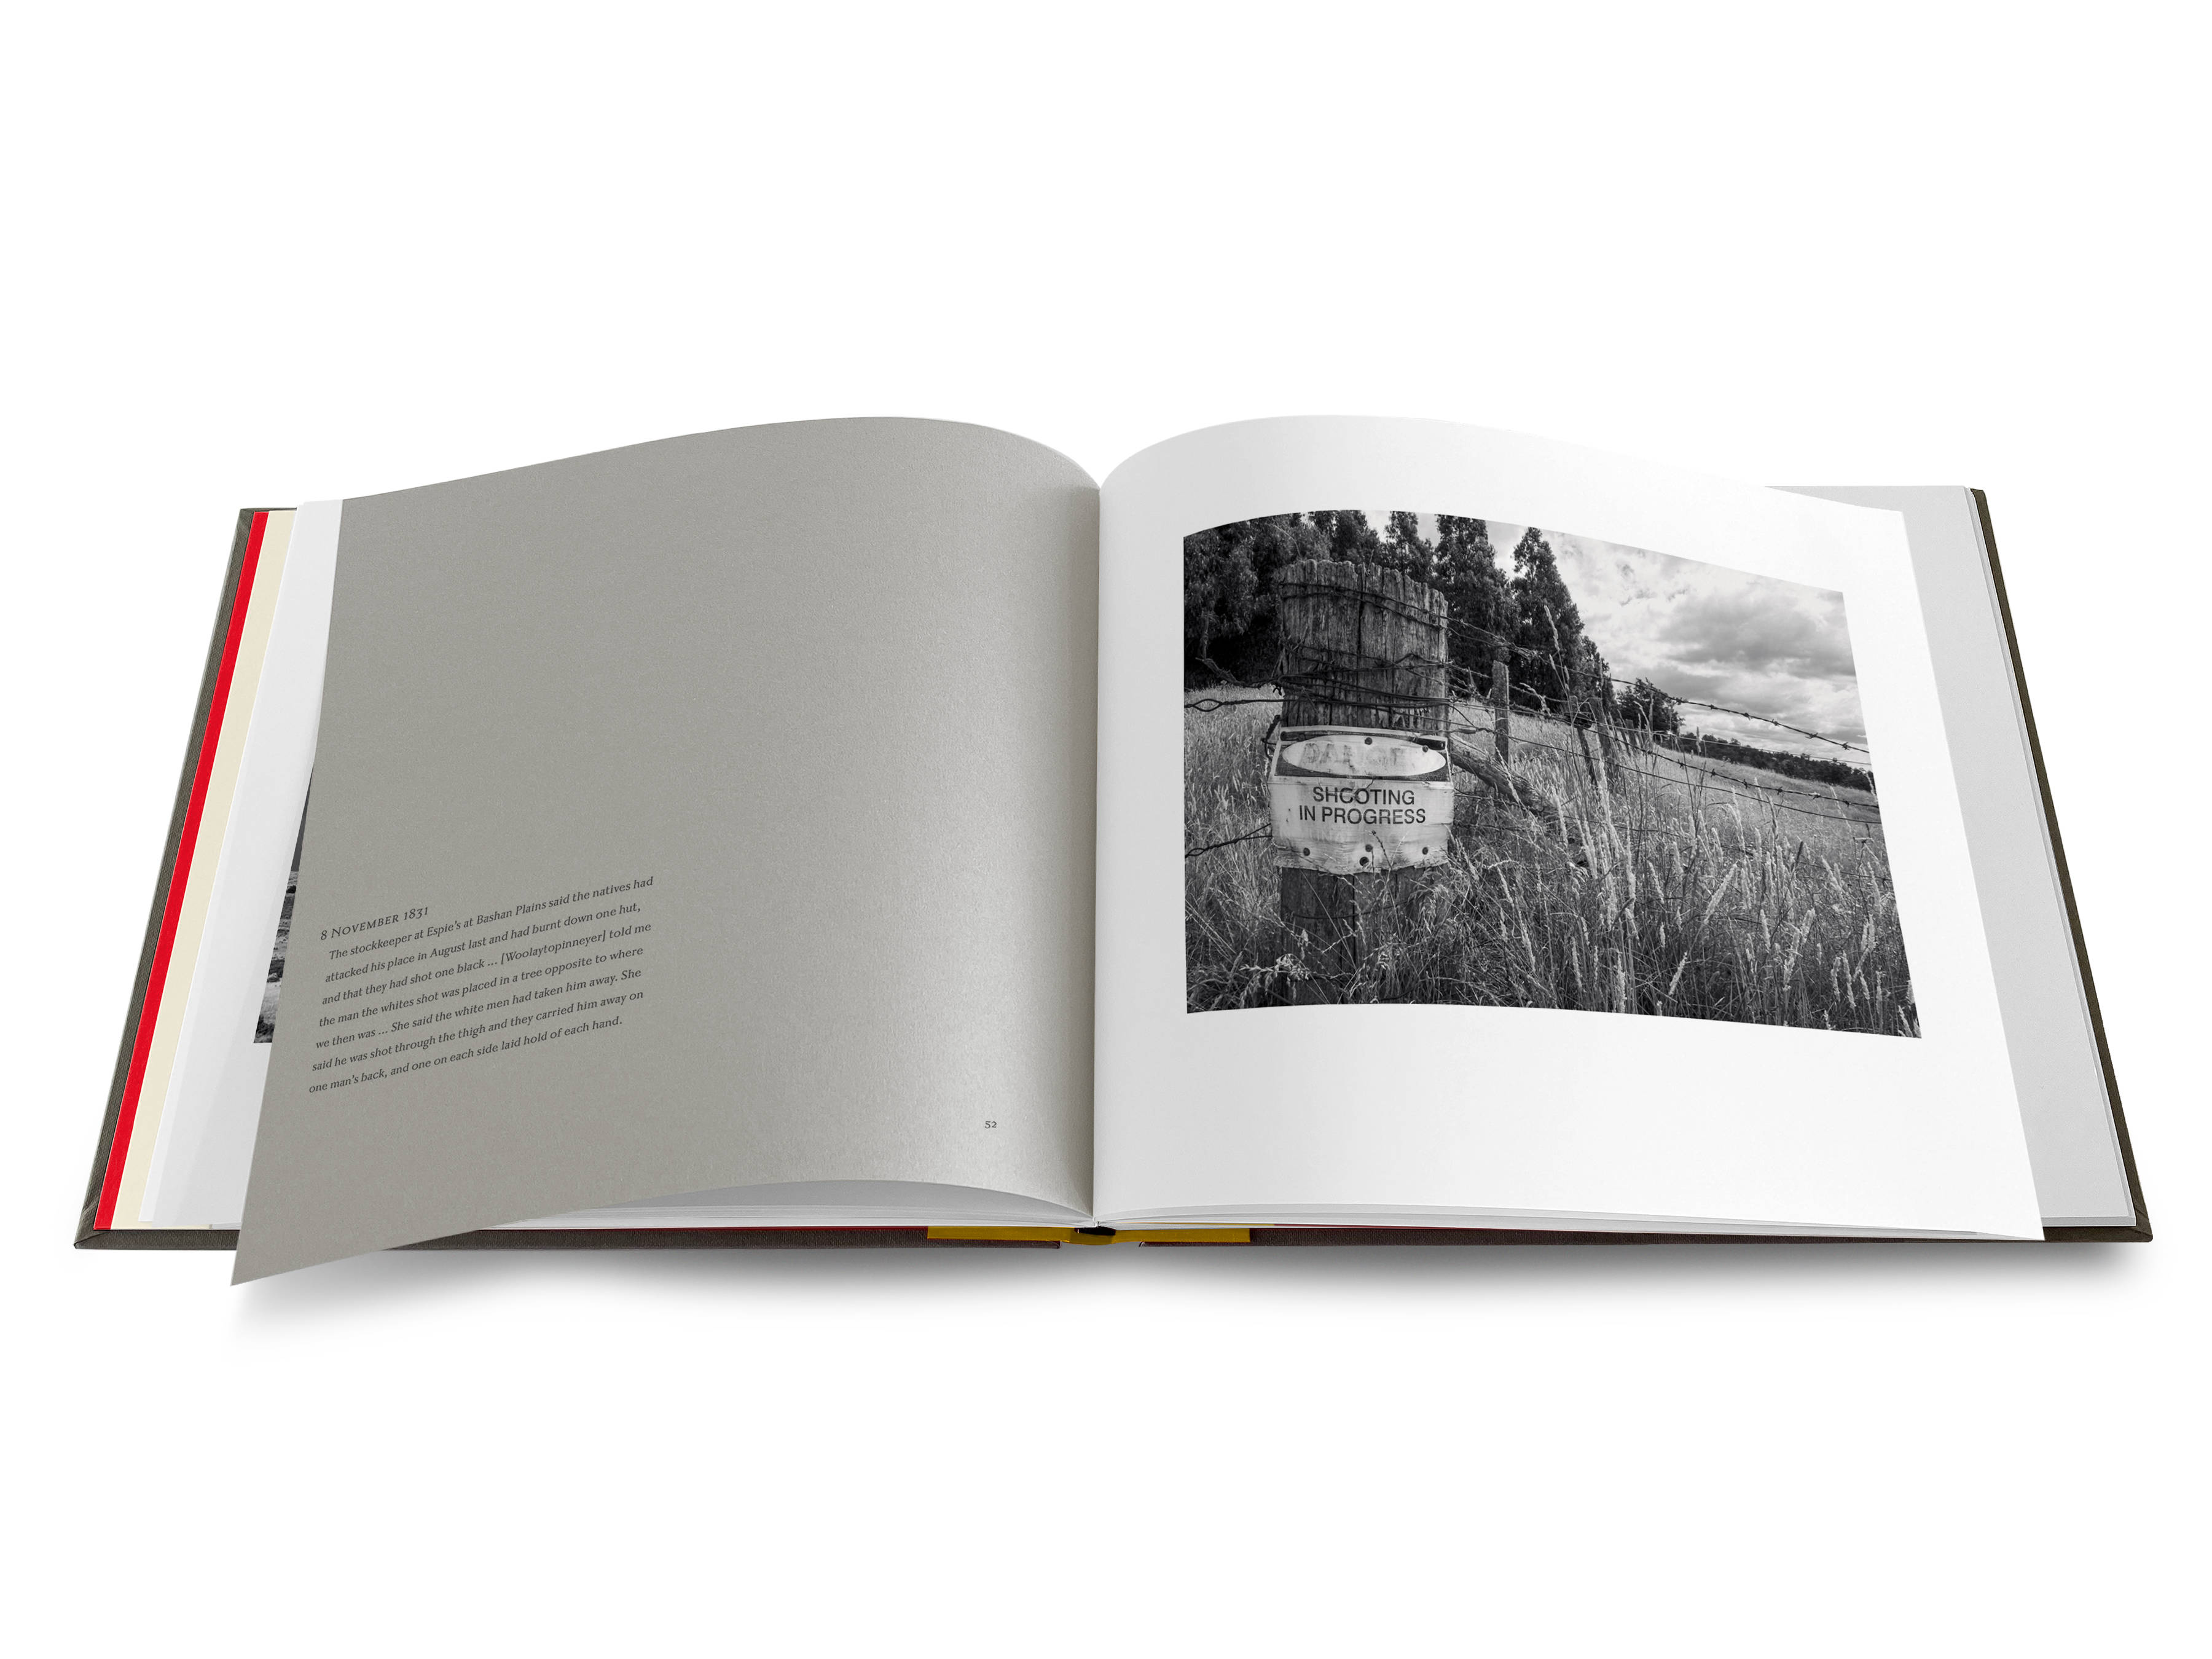 An image of a double-page spread from the Uninnocent Landscapes book with an image on the right of a corner barbed-wire fence post in a field with a sign that reads ‘DANGER SHOOTING IN PROGRESS’. There is a row of pine trees in the background. On the left there is a quote from Robinson’s diary on a grey page.